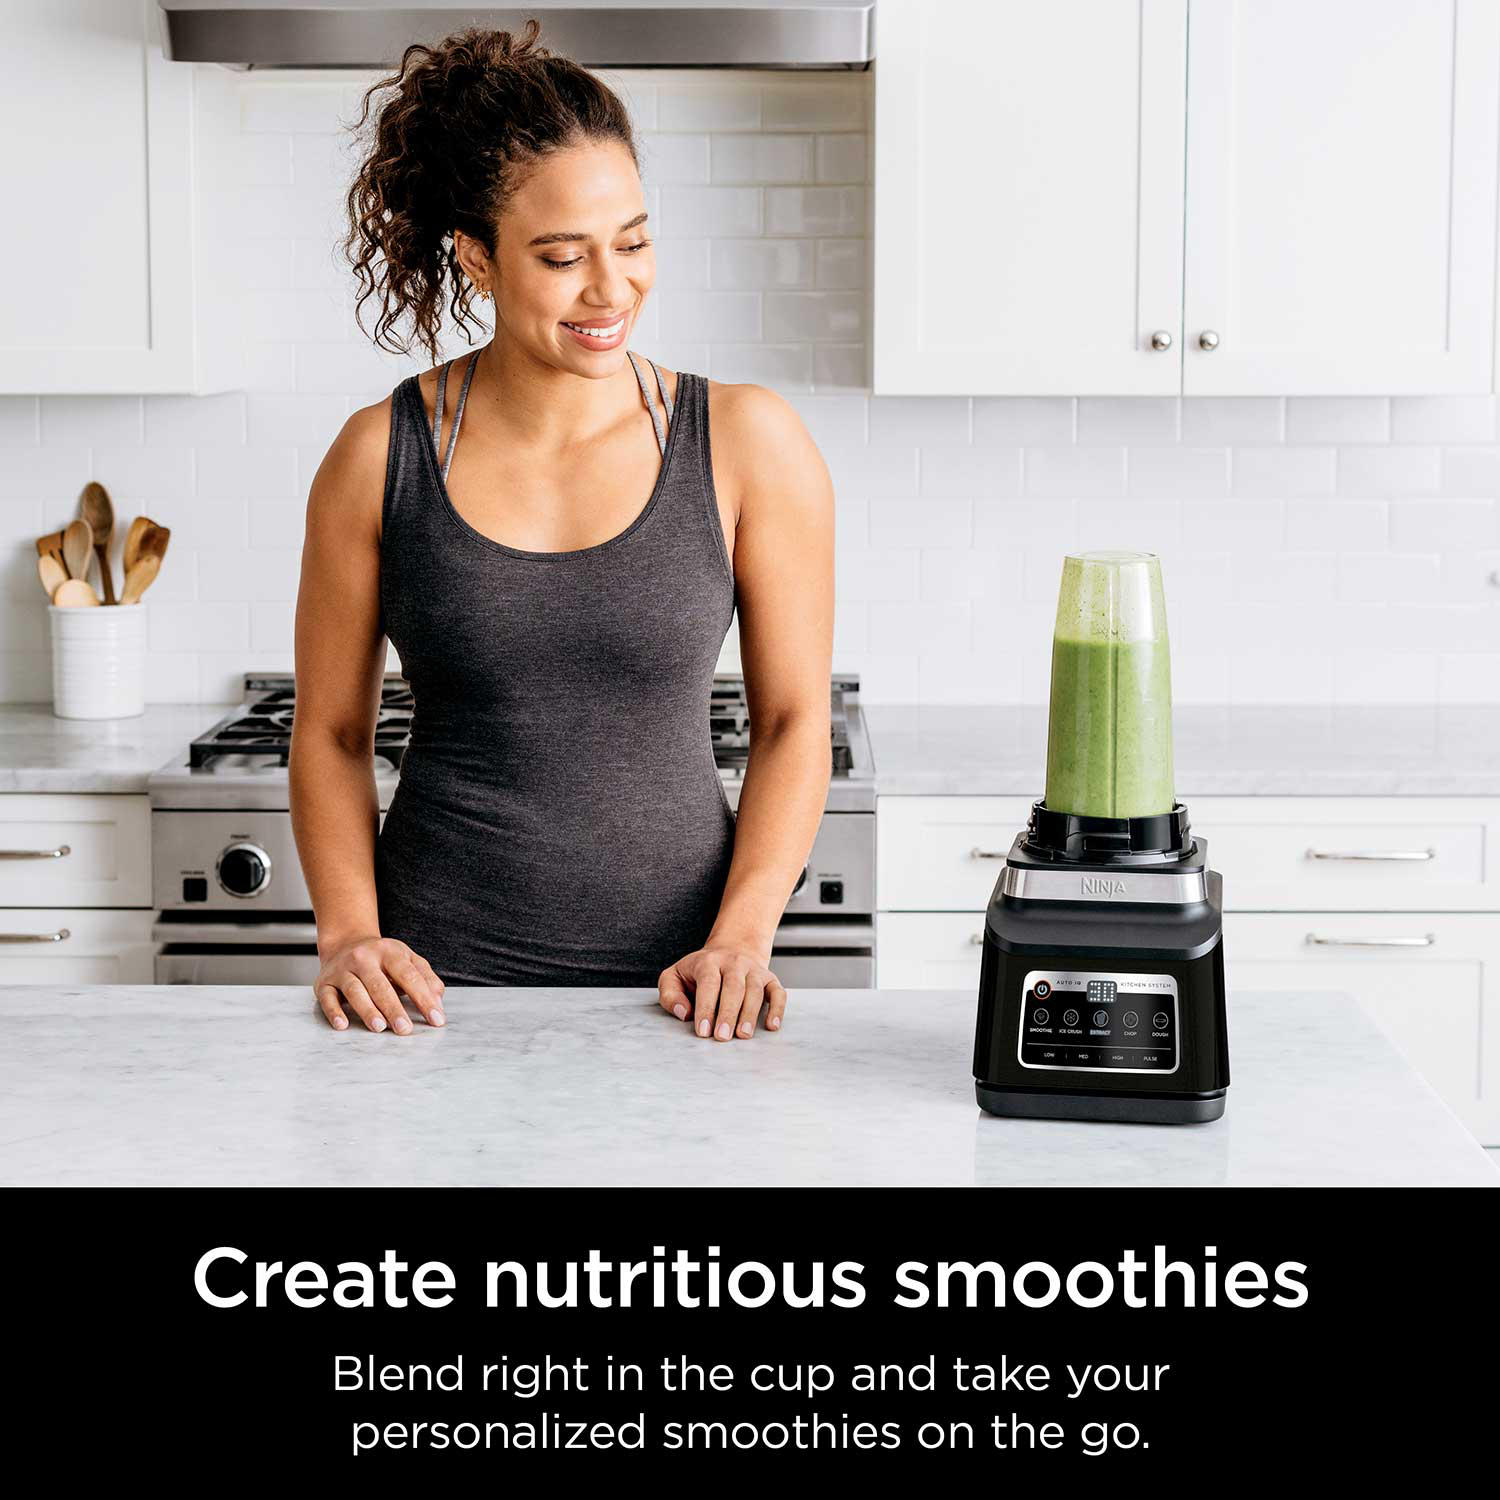 Press one button and this Ninja will slice up a smoothie (pictures) - CNET